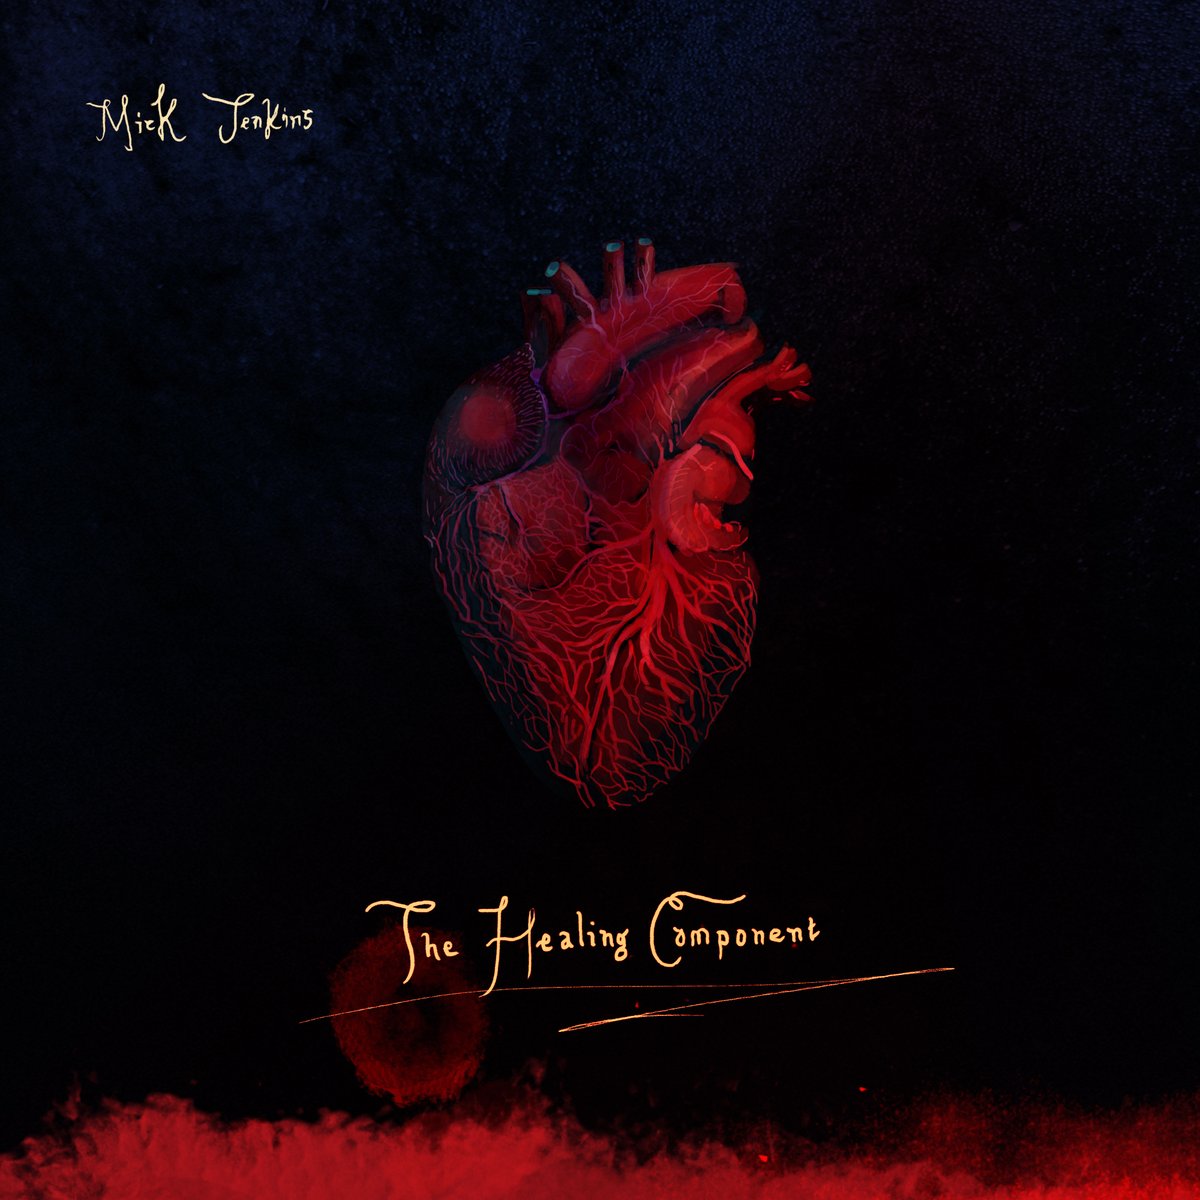 Stream ‘The Healing Component’ By Mick Jenkins